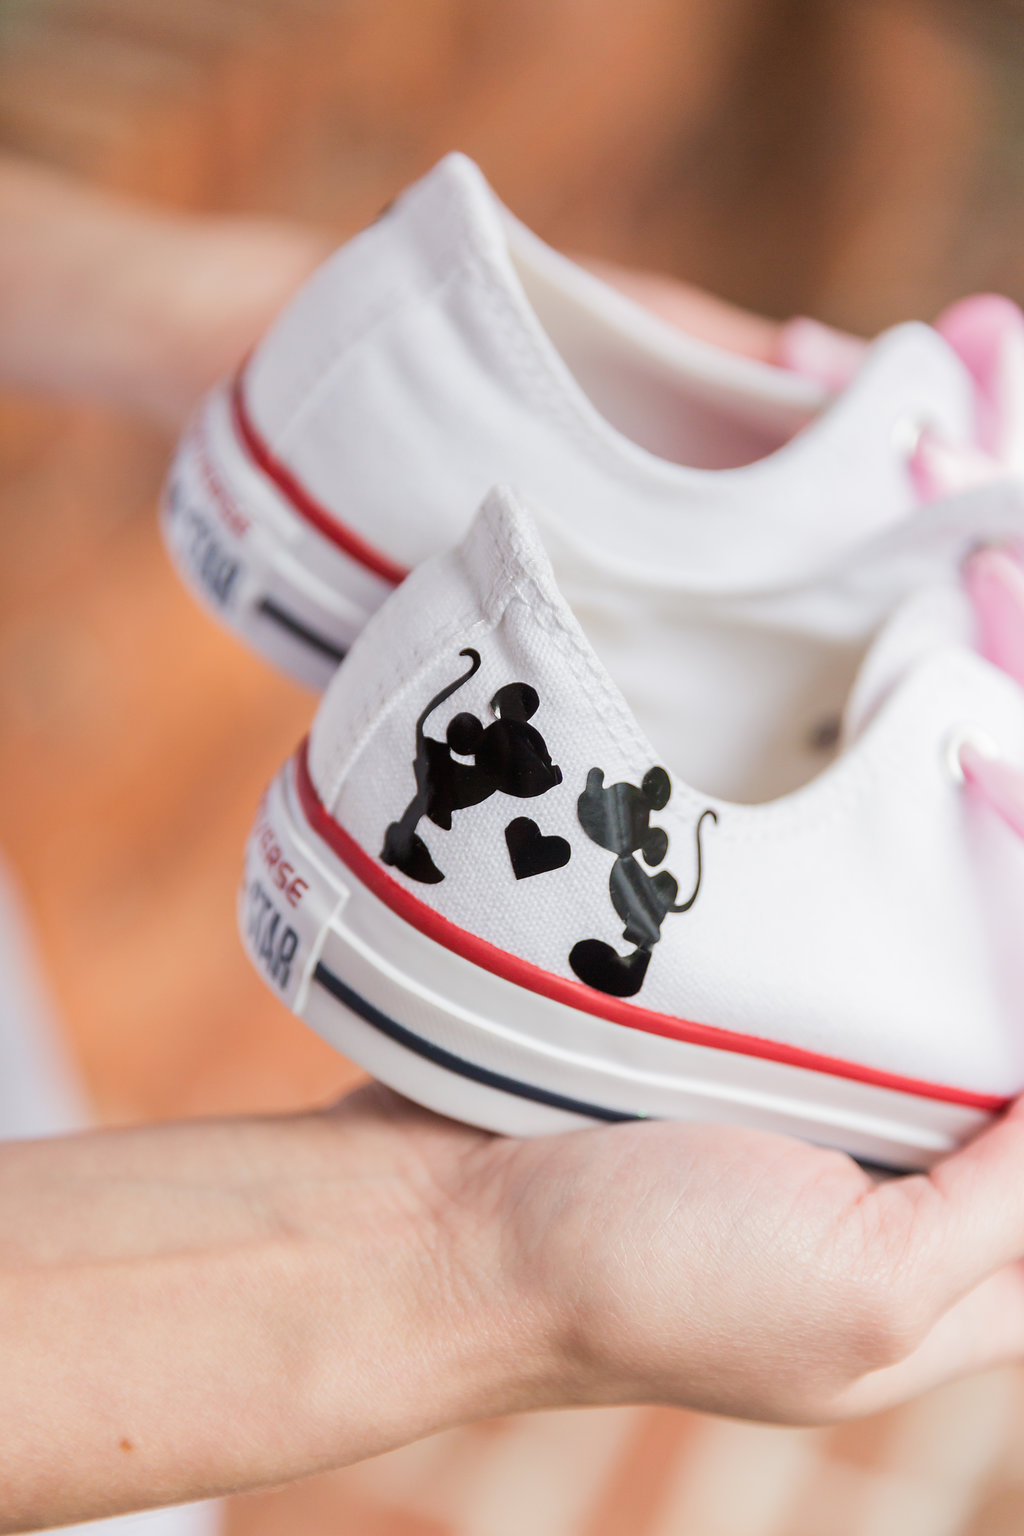 The Disney loving bride wrote her groom's name on the bottom of her converse sneakers, while the opposite shoe had a silhouette of Mickey and Minnie kissing